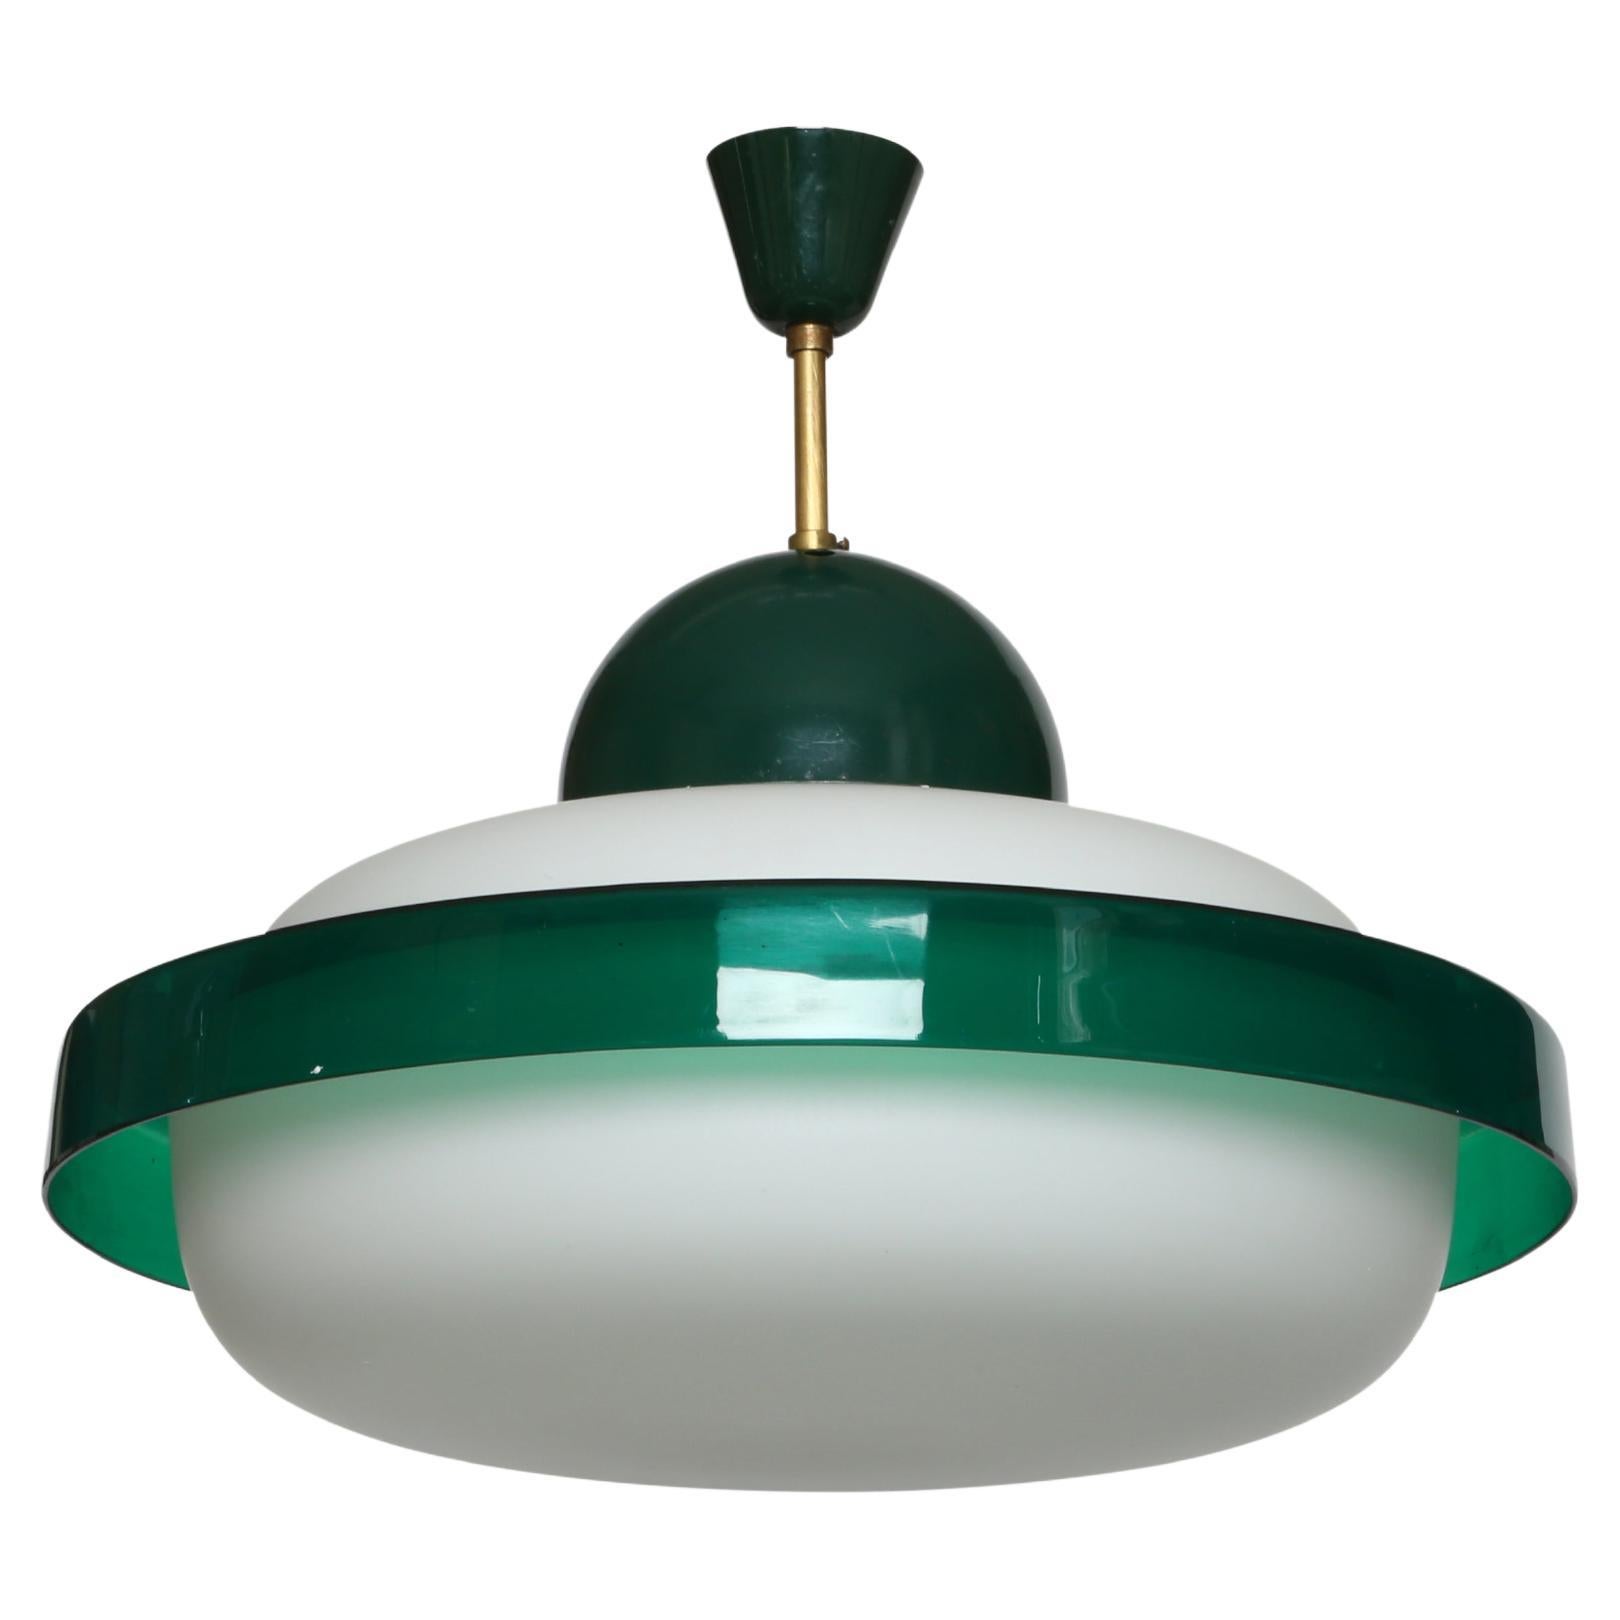 Stilnovo ceiling pendant.
Designed and made in Italy, 1960s
Opaline glass, enameled metal, plexiglass.
Takes one medium base bulb. 
Complimentary US rewiring upon request.
